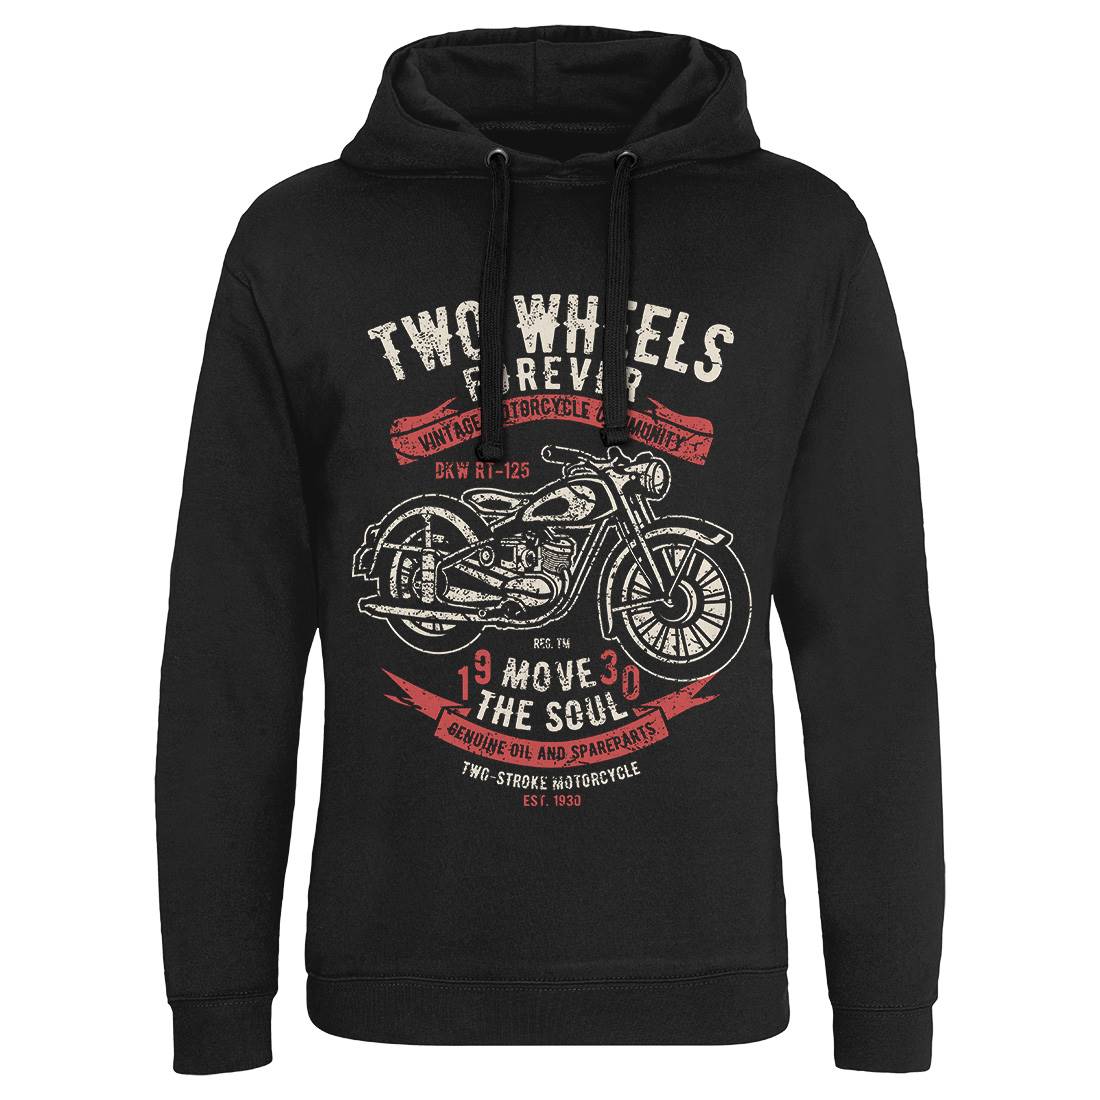 Two Wheels Forever Mens Hoodie Without Pocket Motorcycles A187